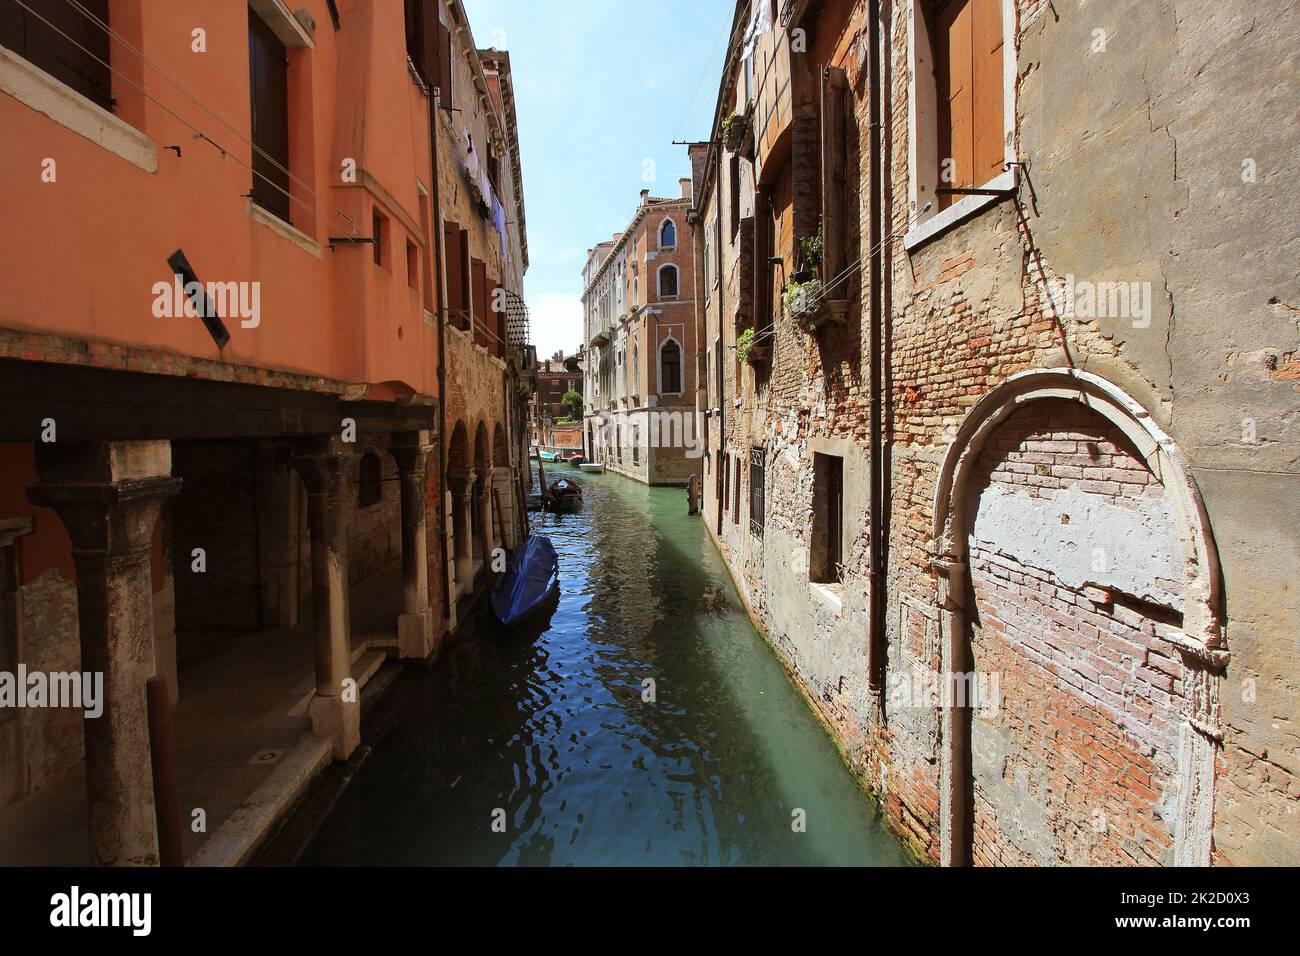 Canal in Venice, Italy. Exquisite buildings along Canals. Stock Photo